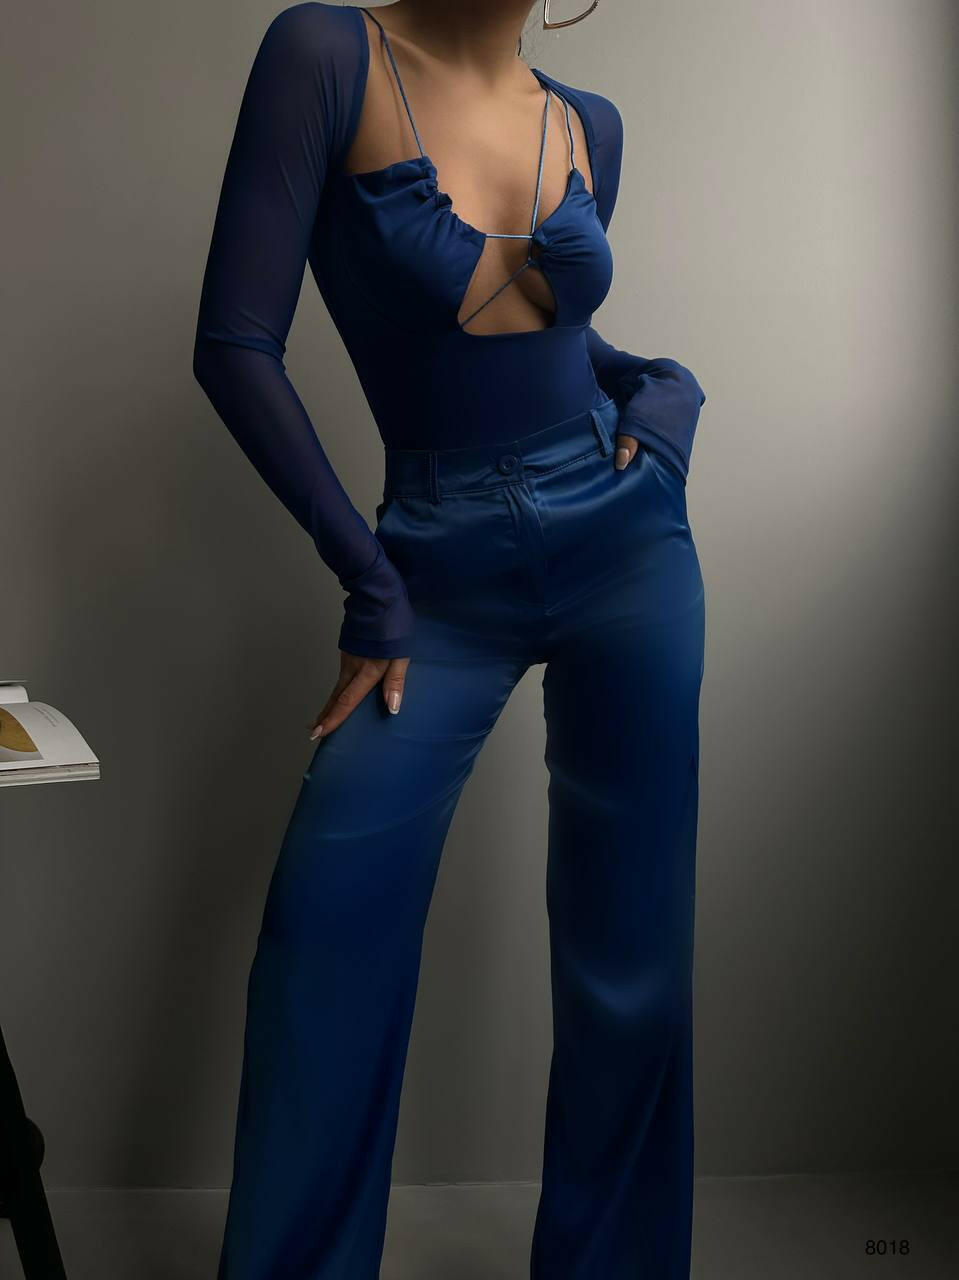 Plunging Neckline with Sheer Sleeves Bodysuit - Saxe Blue